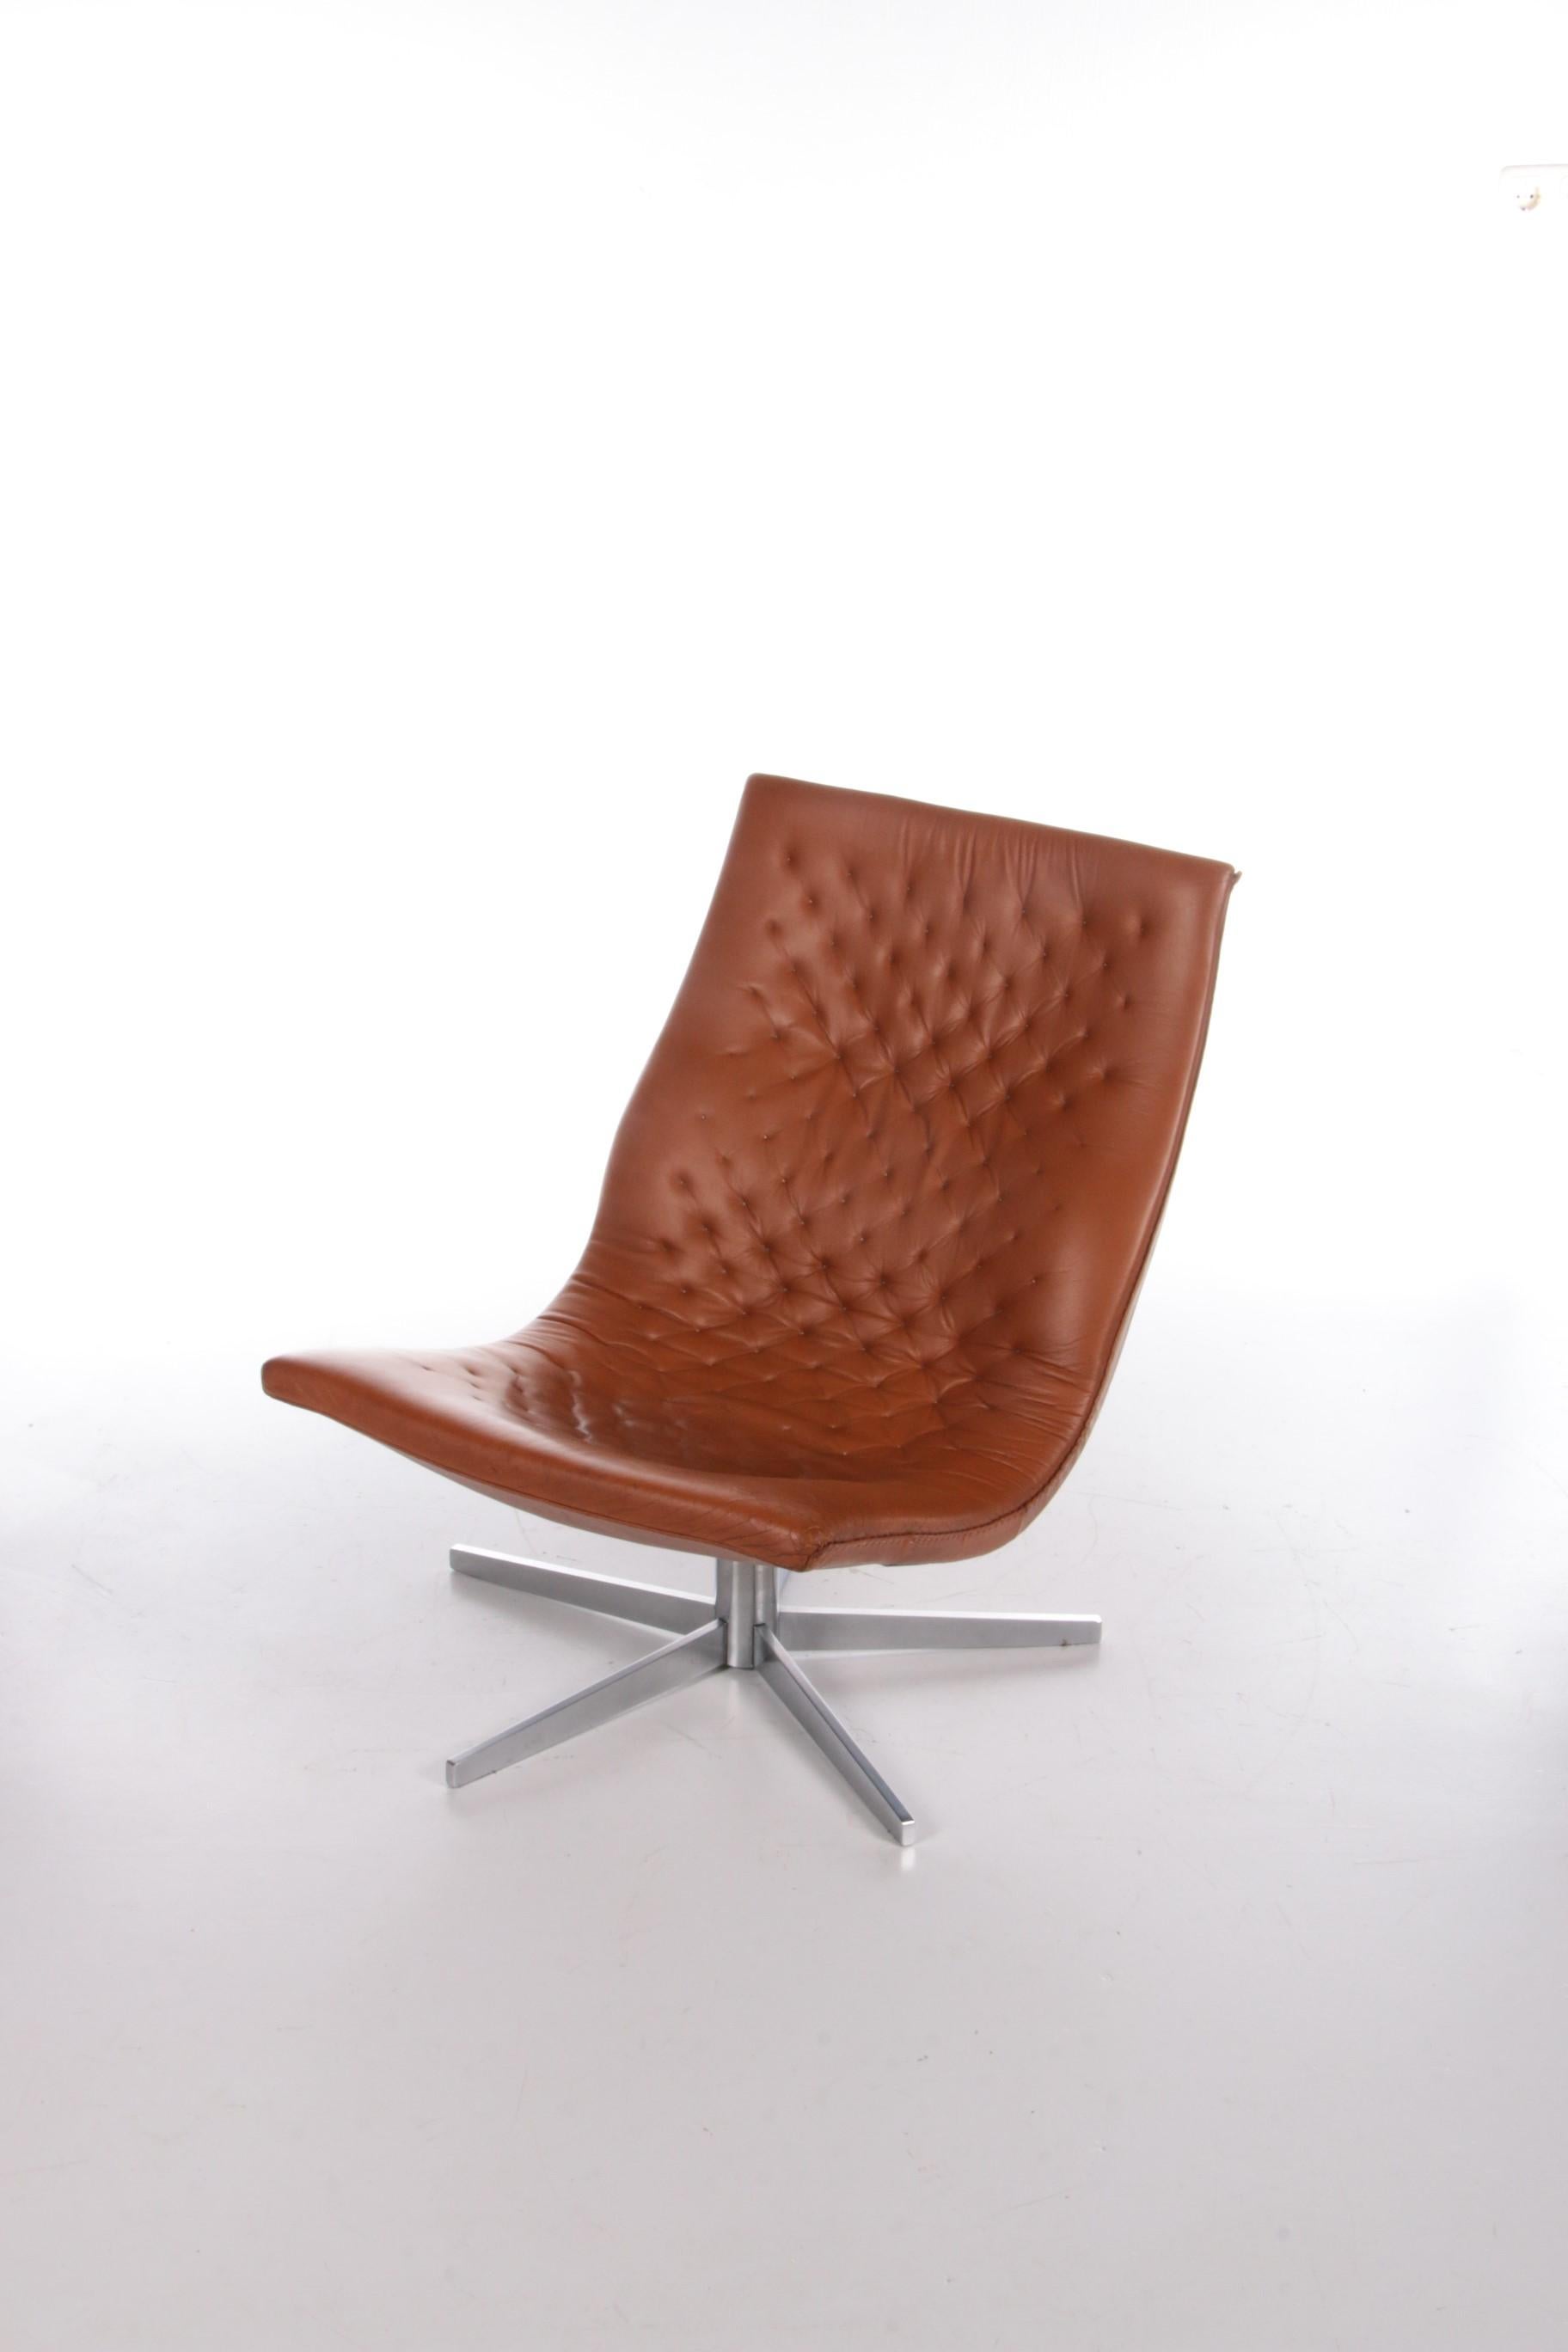 Beautiful Cognac color leather relax armchair made by De Sede Switzerland.

The chair has a metal bottom with a nice foot.

This chair is completely handmade and the edge is completely closed by hand, this is really a top armchair.

The patina